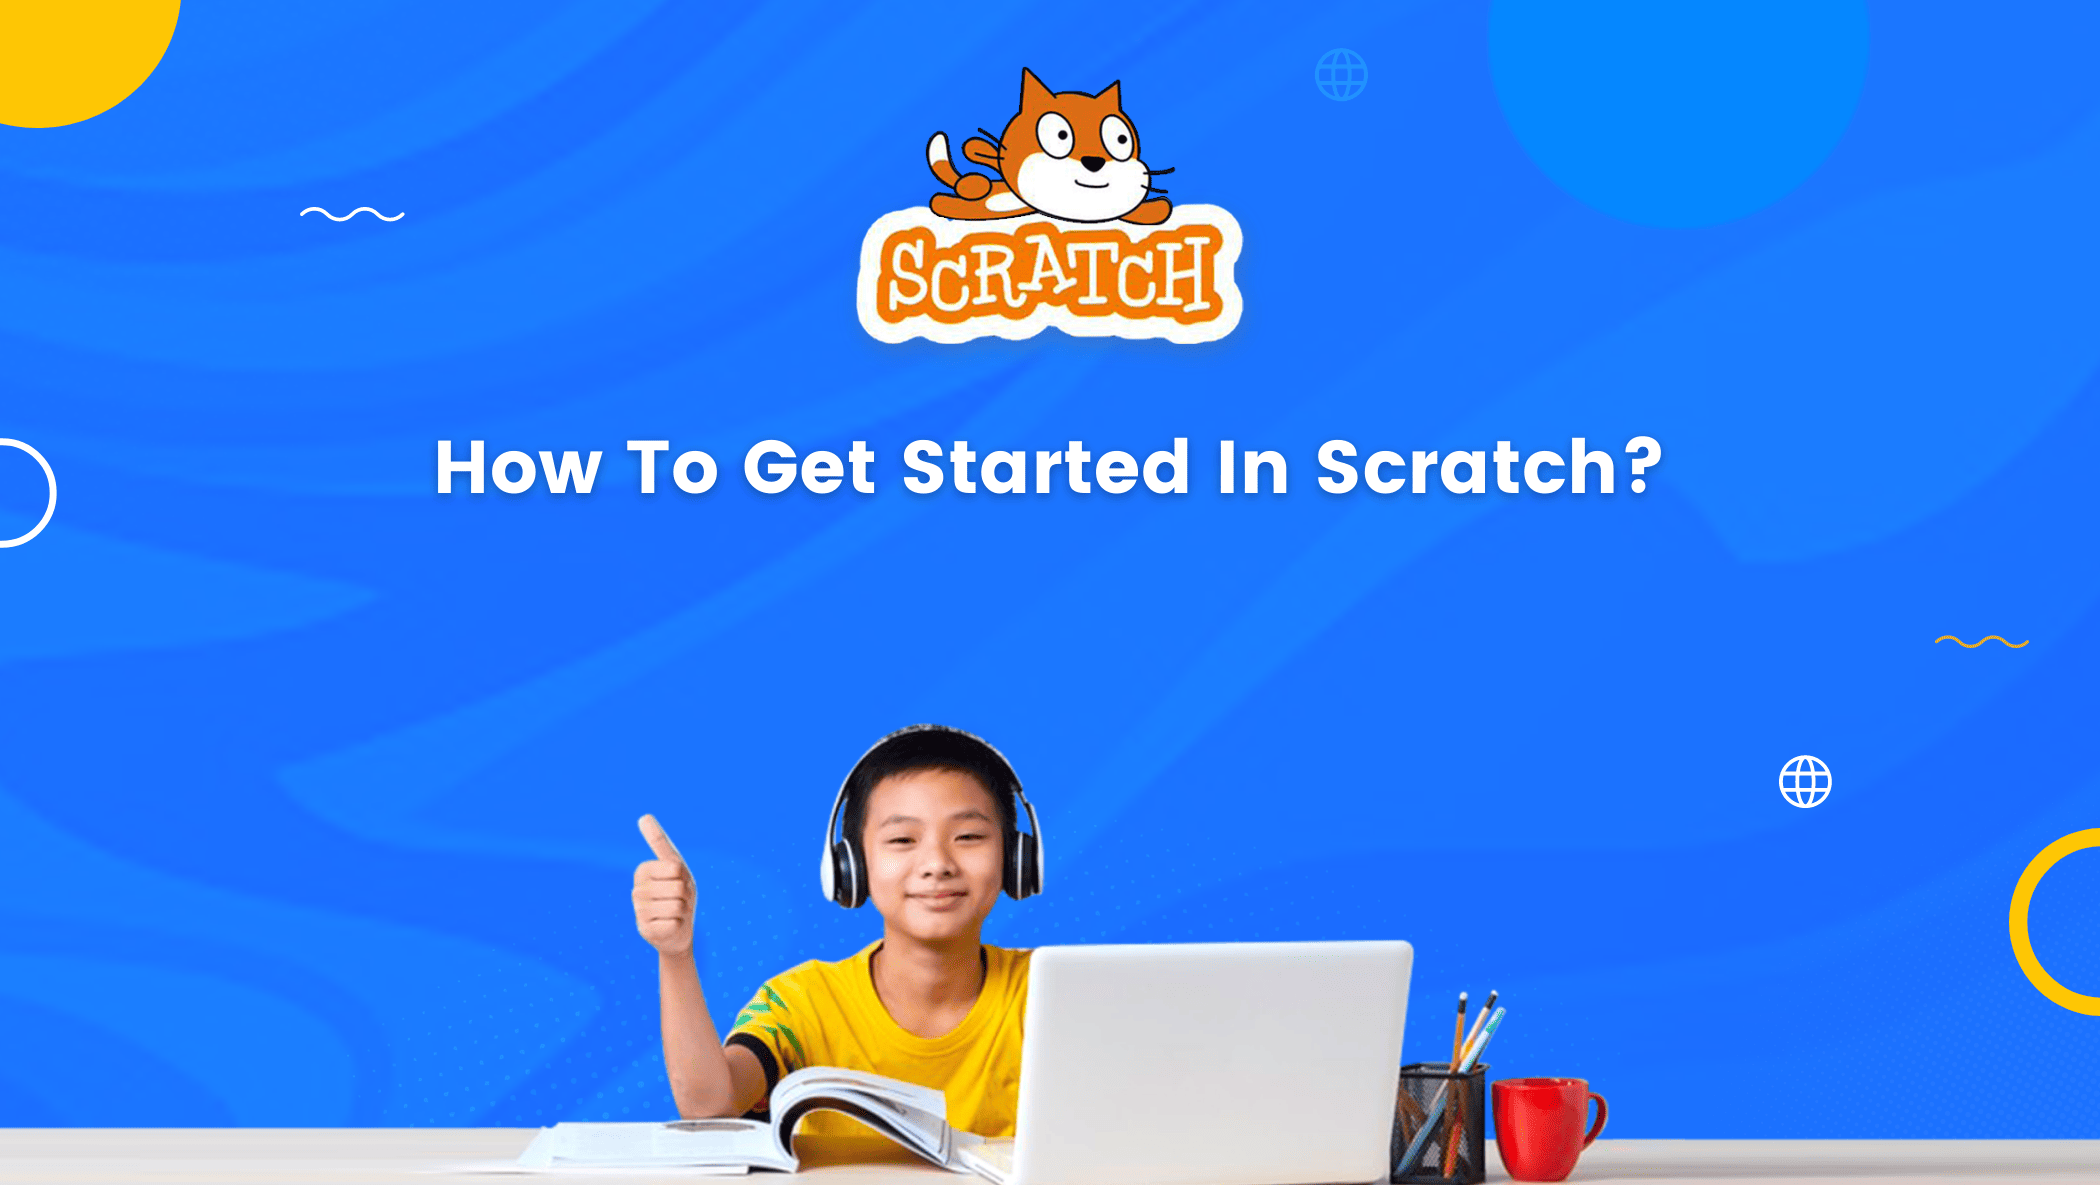 How To Get Started In Scratch